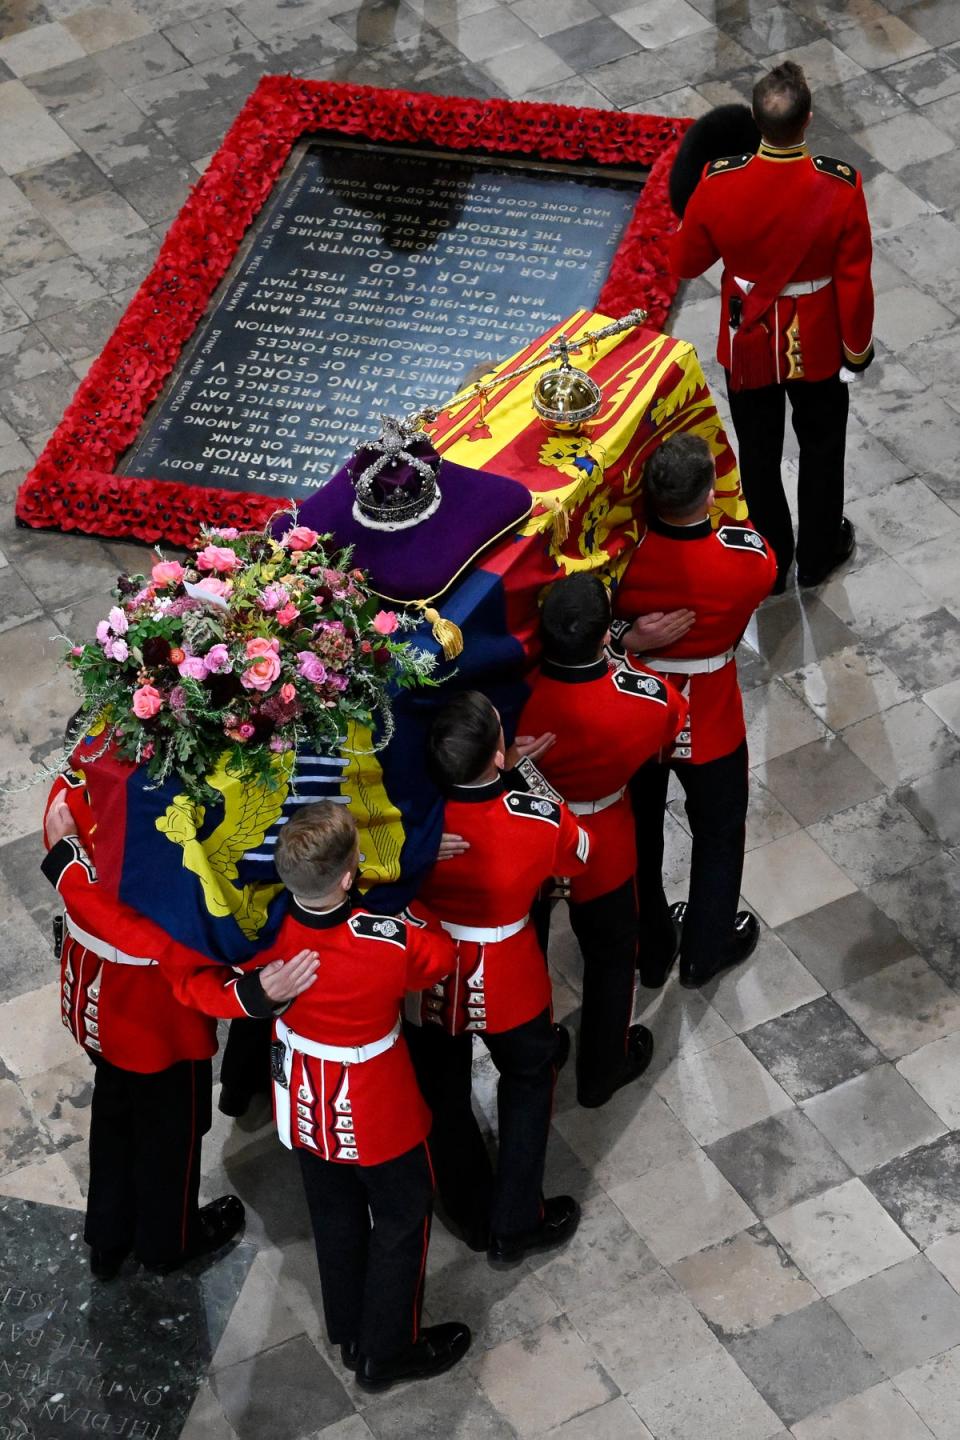 The wreath was made in a sustainable way, Buckingham Palace said (Getty Images)